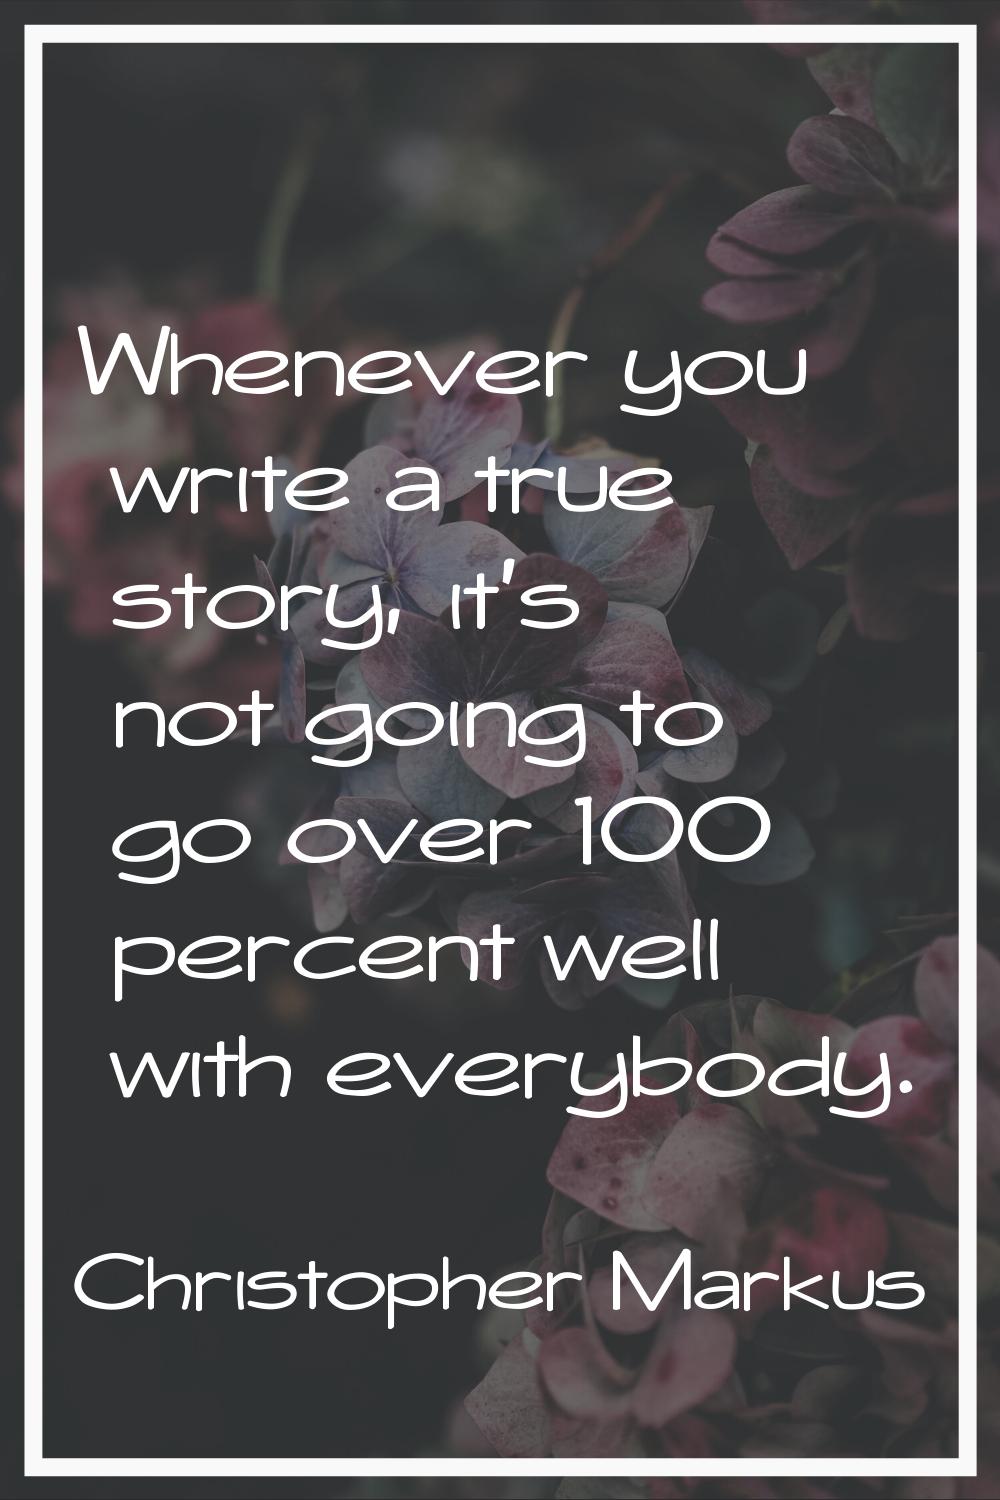 Whenever you write a true story, it's not going to go over 100 percent well with everybody.